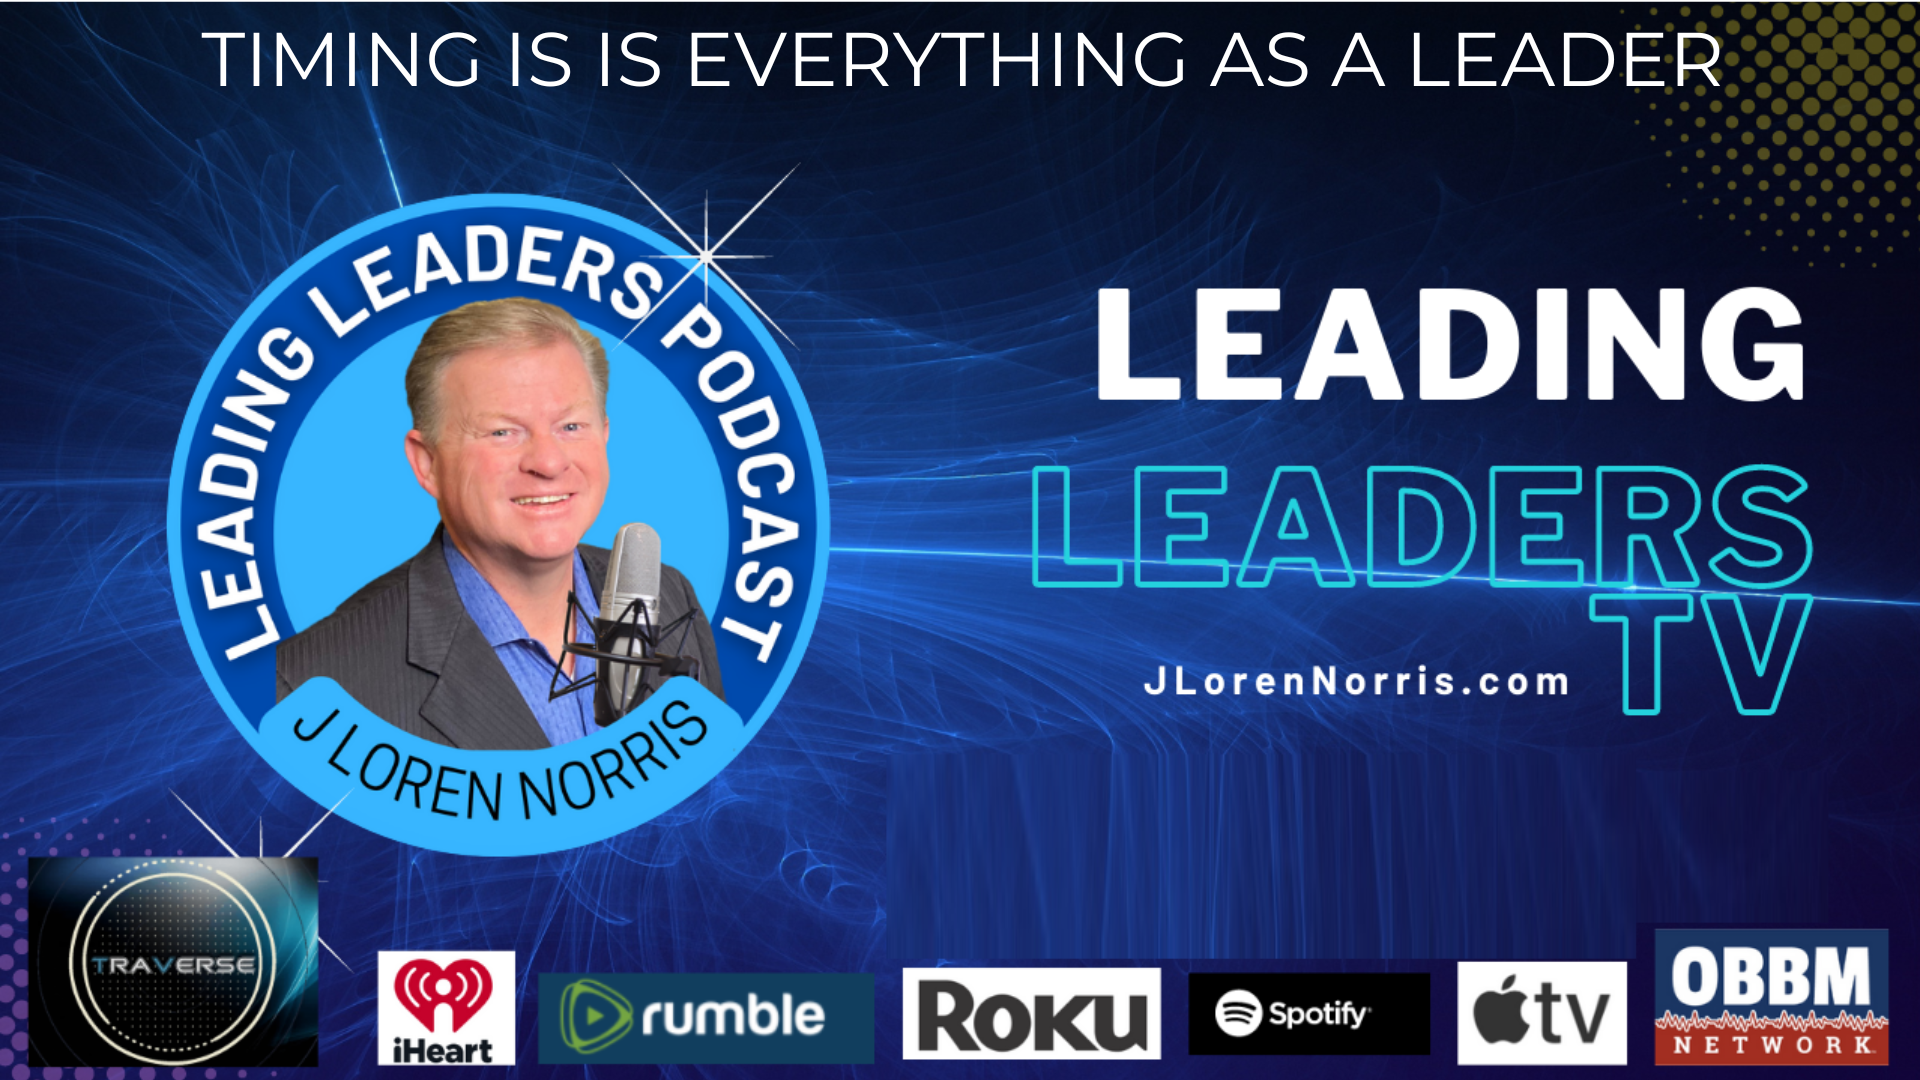 LL190-TIMING IS IS EVERYTHING AS A LEADER - Leading Leaders TV